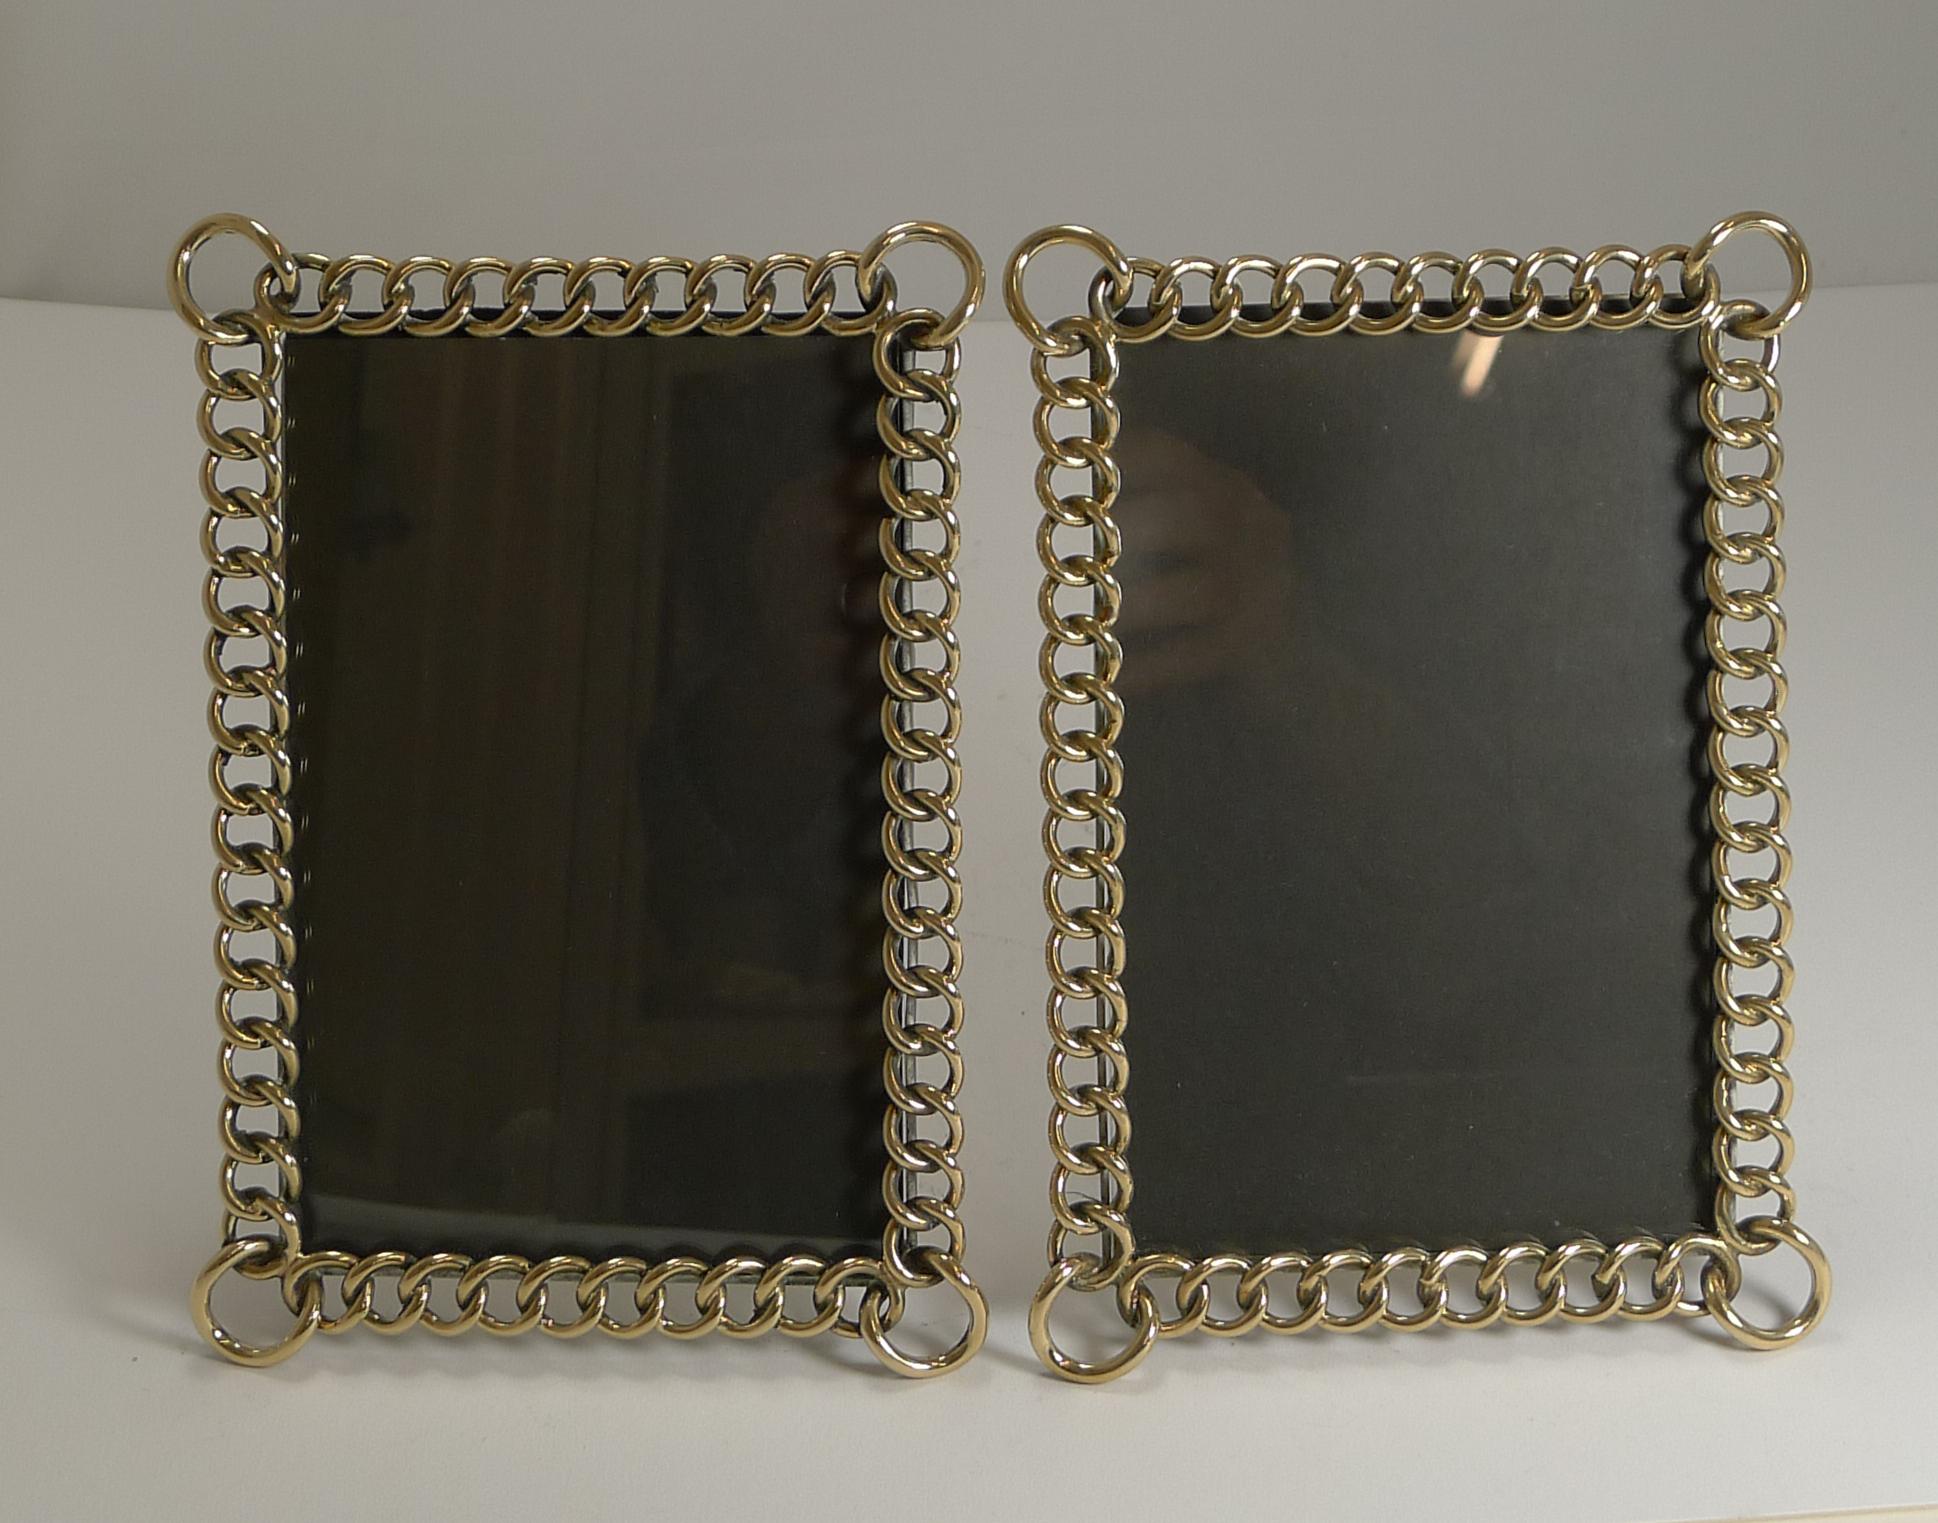 A handsome pair of late Victorian English photograph frames made from interlocking solid brass rings and standing on the original folding easel stands.

Victorian in Era dating to circa 1890. Each measuring 8